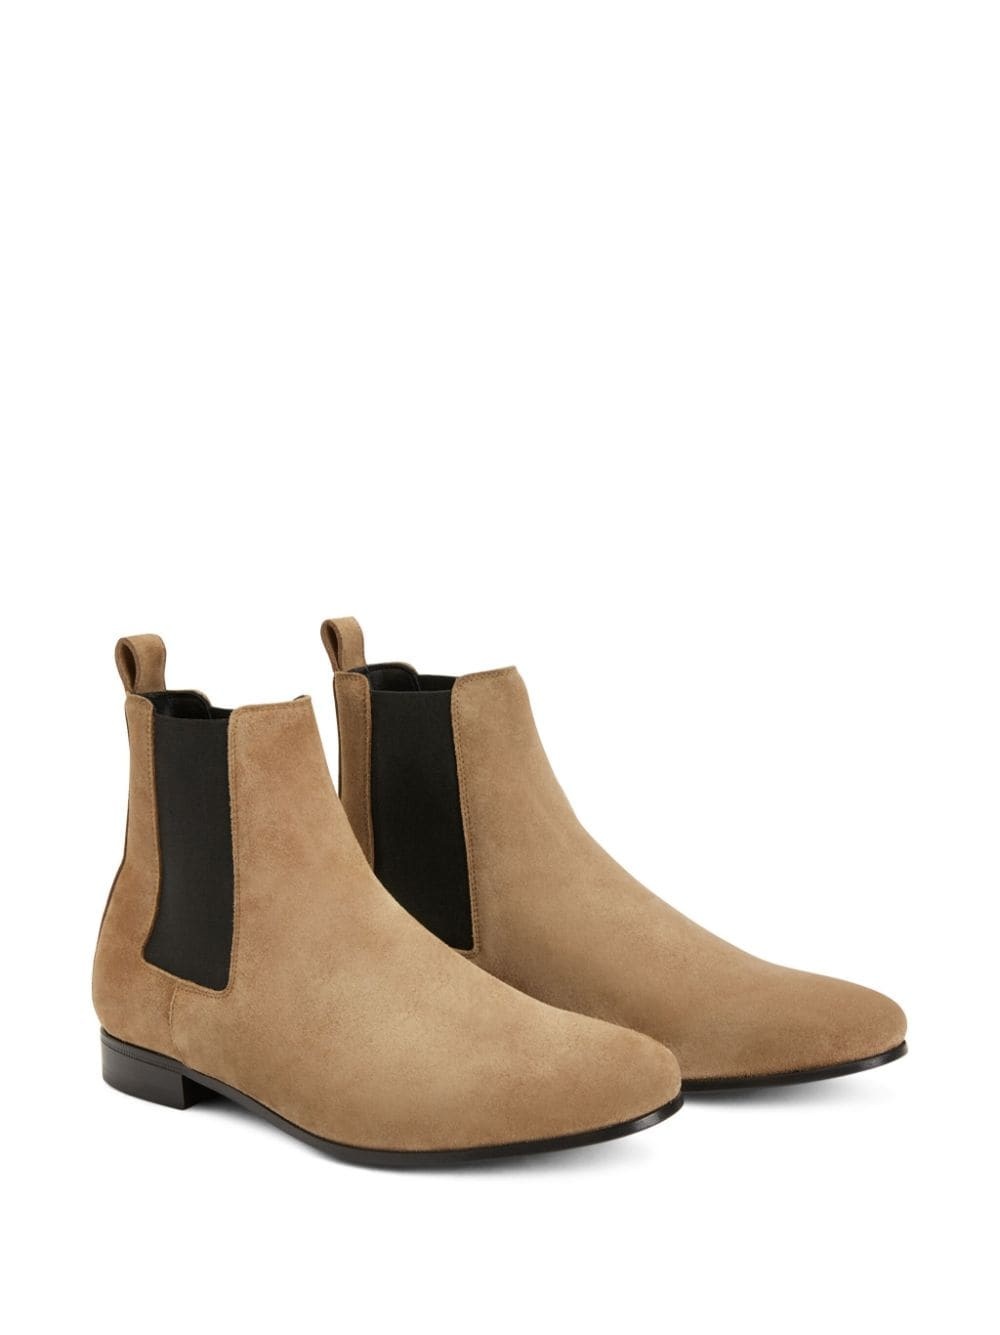 Eligio suede ankle boots - 2